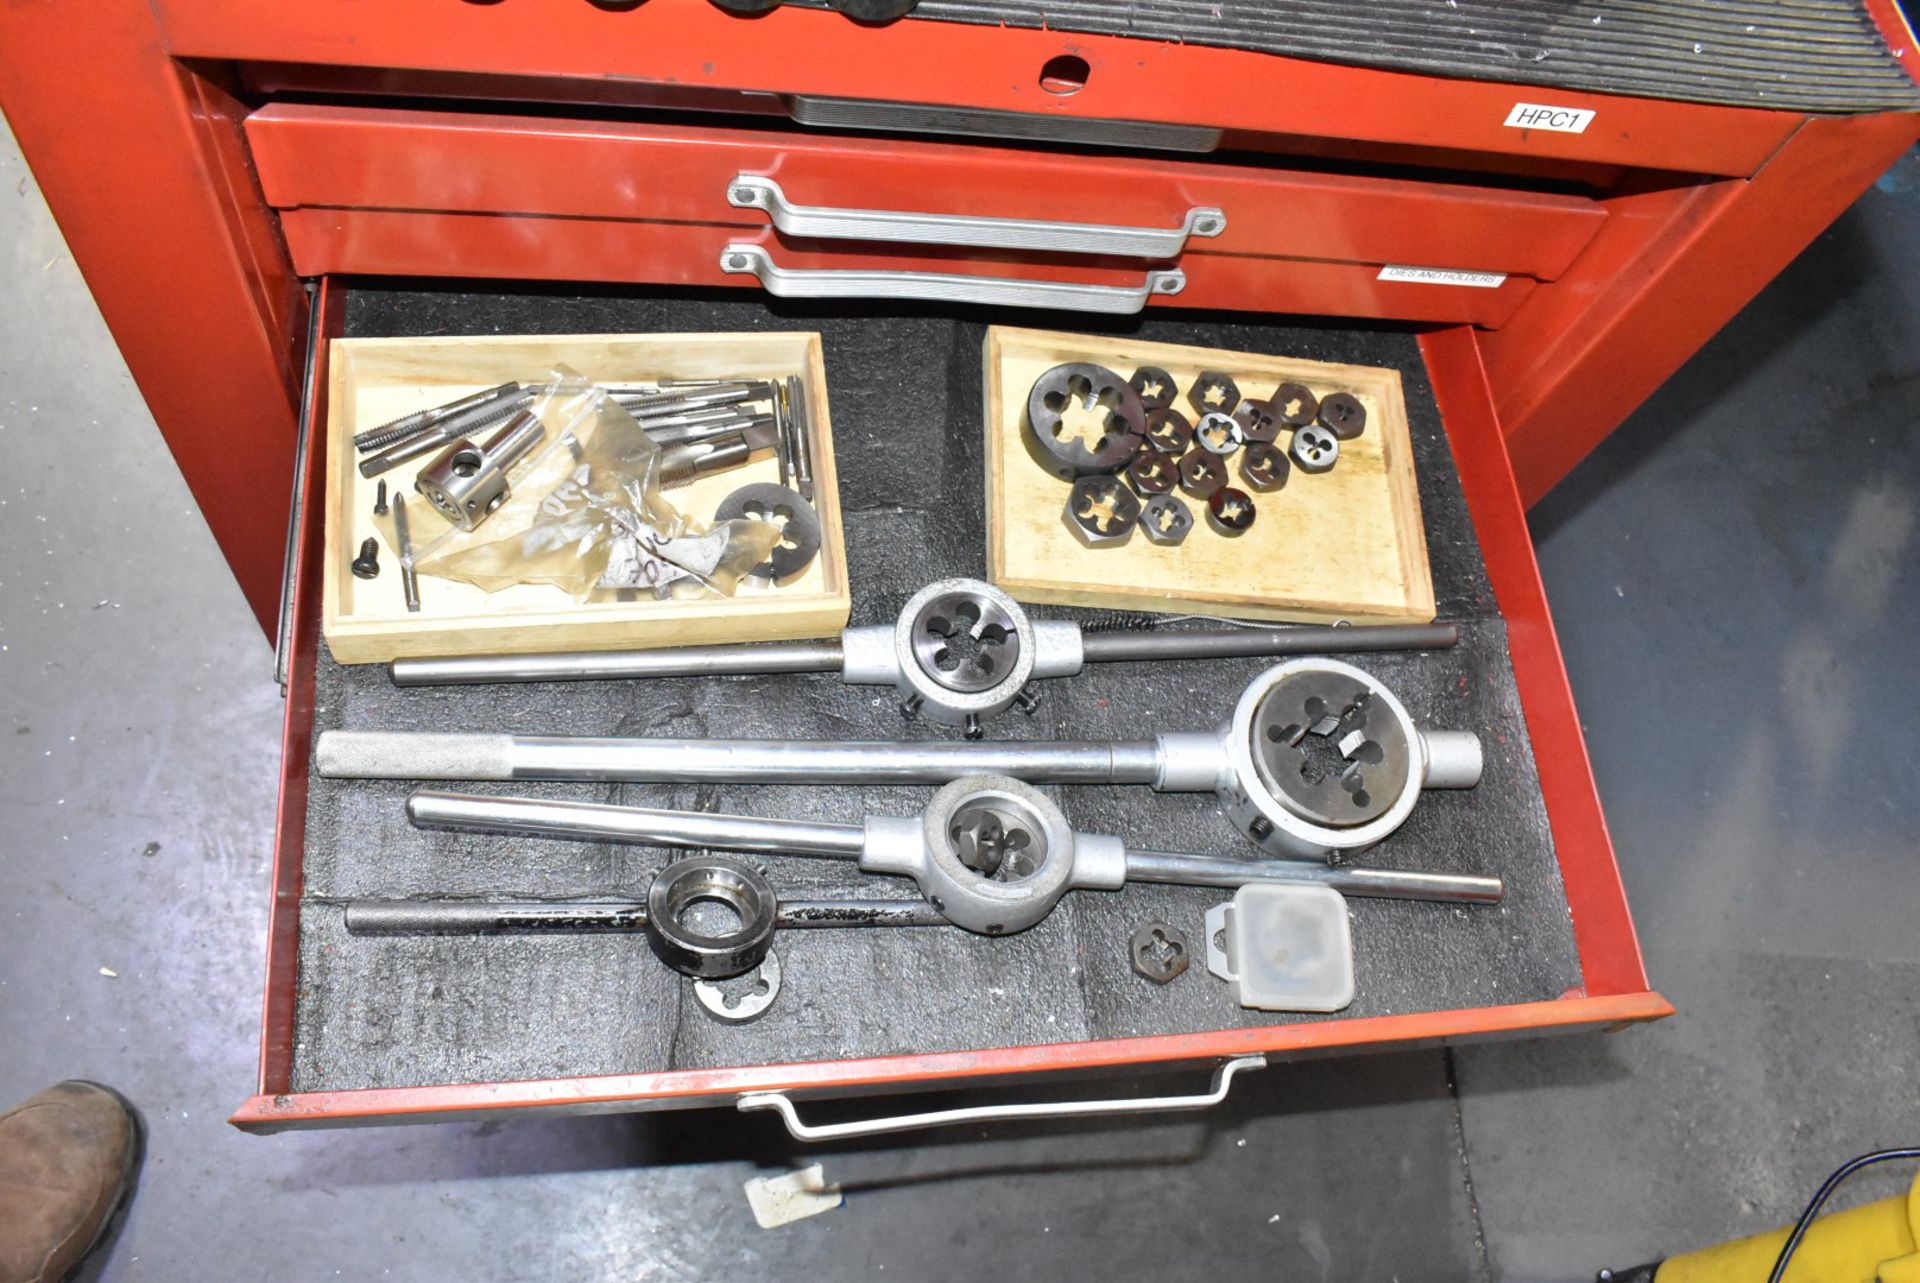 LOT/ ROLLING TOOLBOX WITH COLLETS, DIES, HANDLES & ACCESSORIES - Image 4 of 7